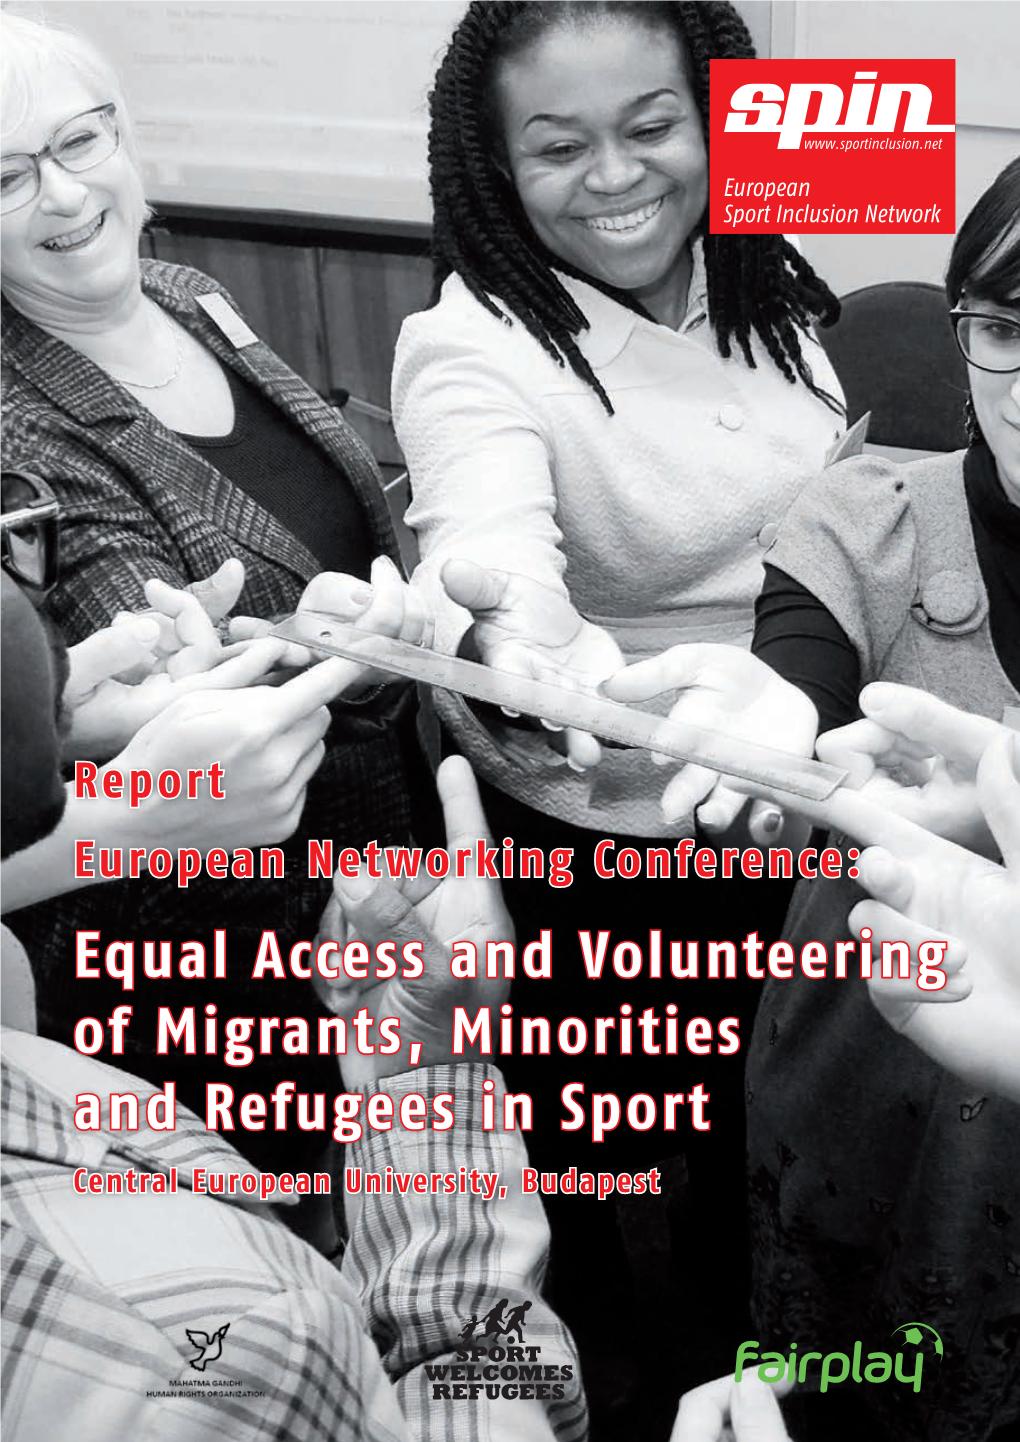 Equal Access and Volunteering of Migrants, Minorities and Refugees in Sport Central European University, Budapest European Networking Conference 2